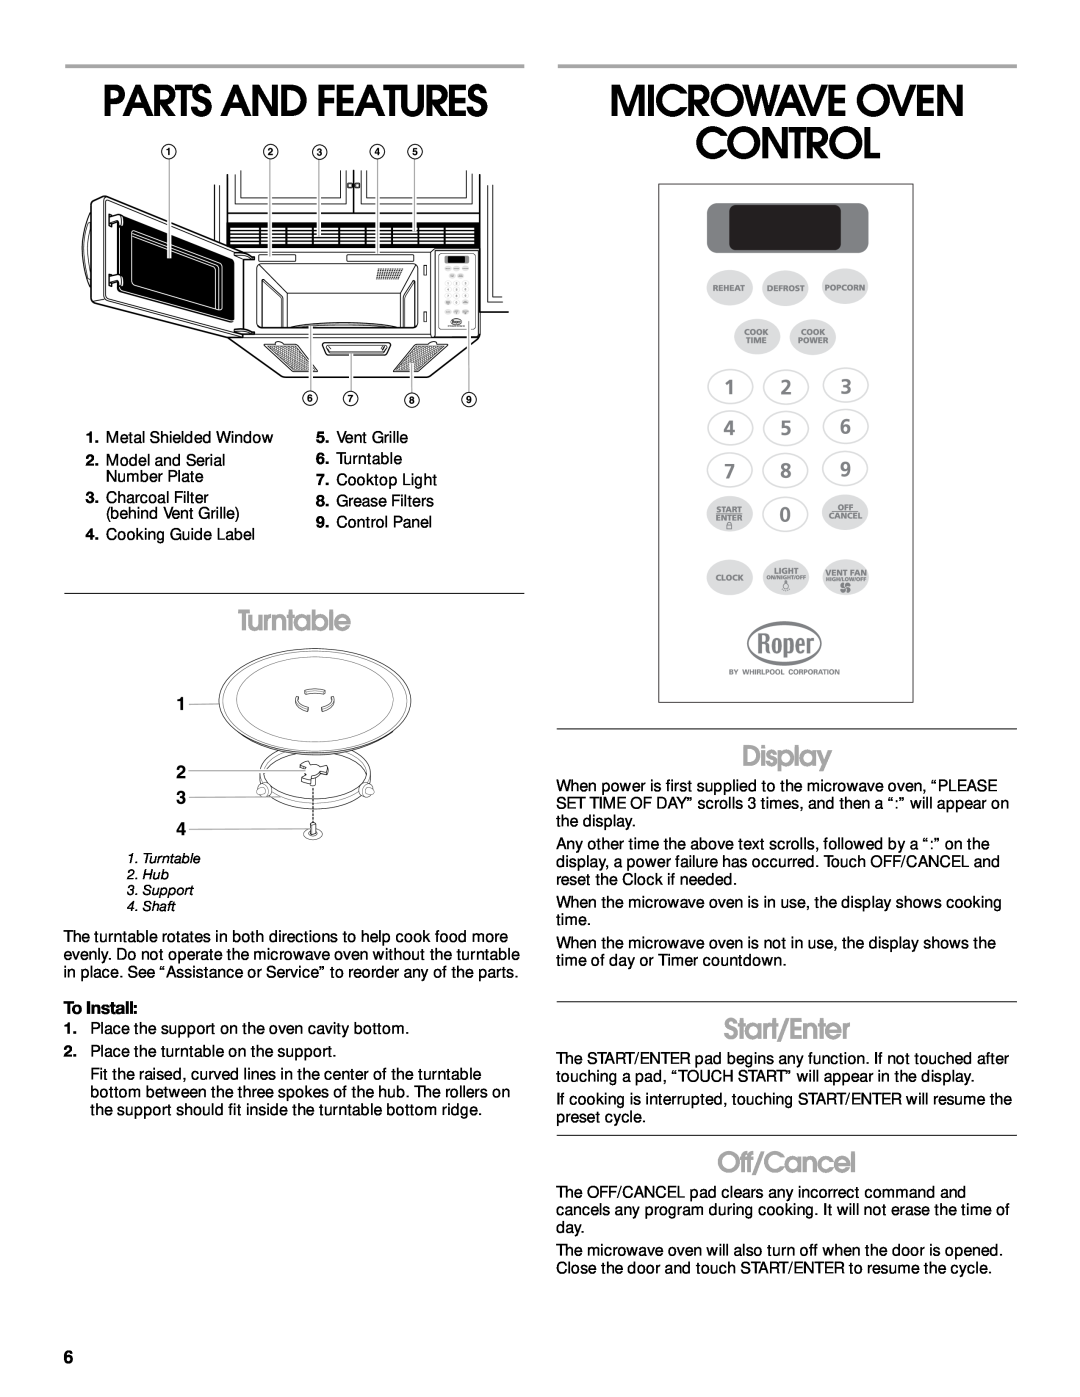 Whirlpool MHE14XK Microwave Oven Control, Parts And Features, Turntable, Display, Start/Enter, Off/Cancel, To Install 